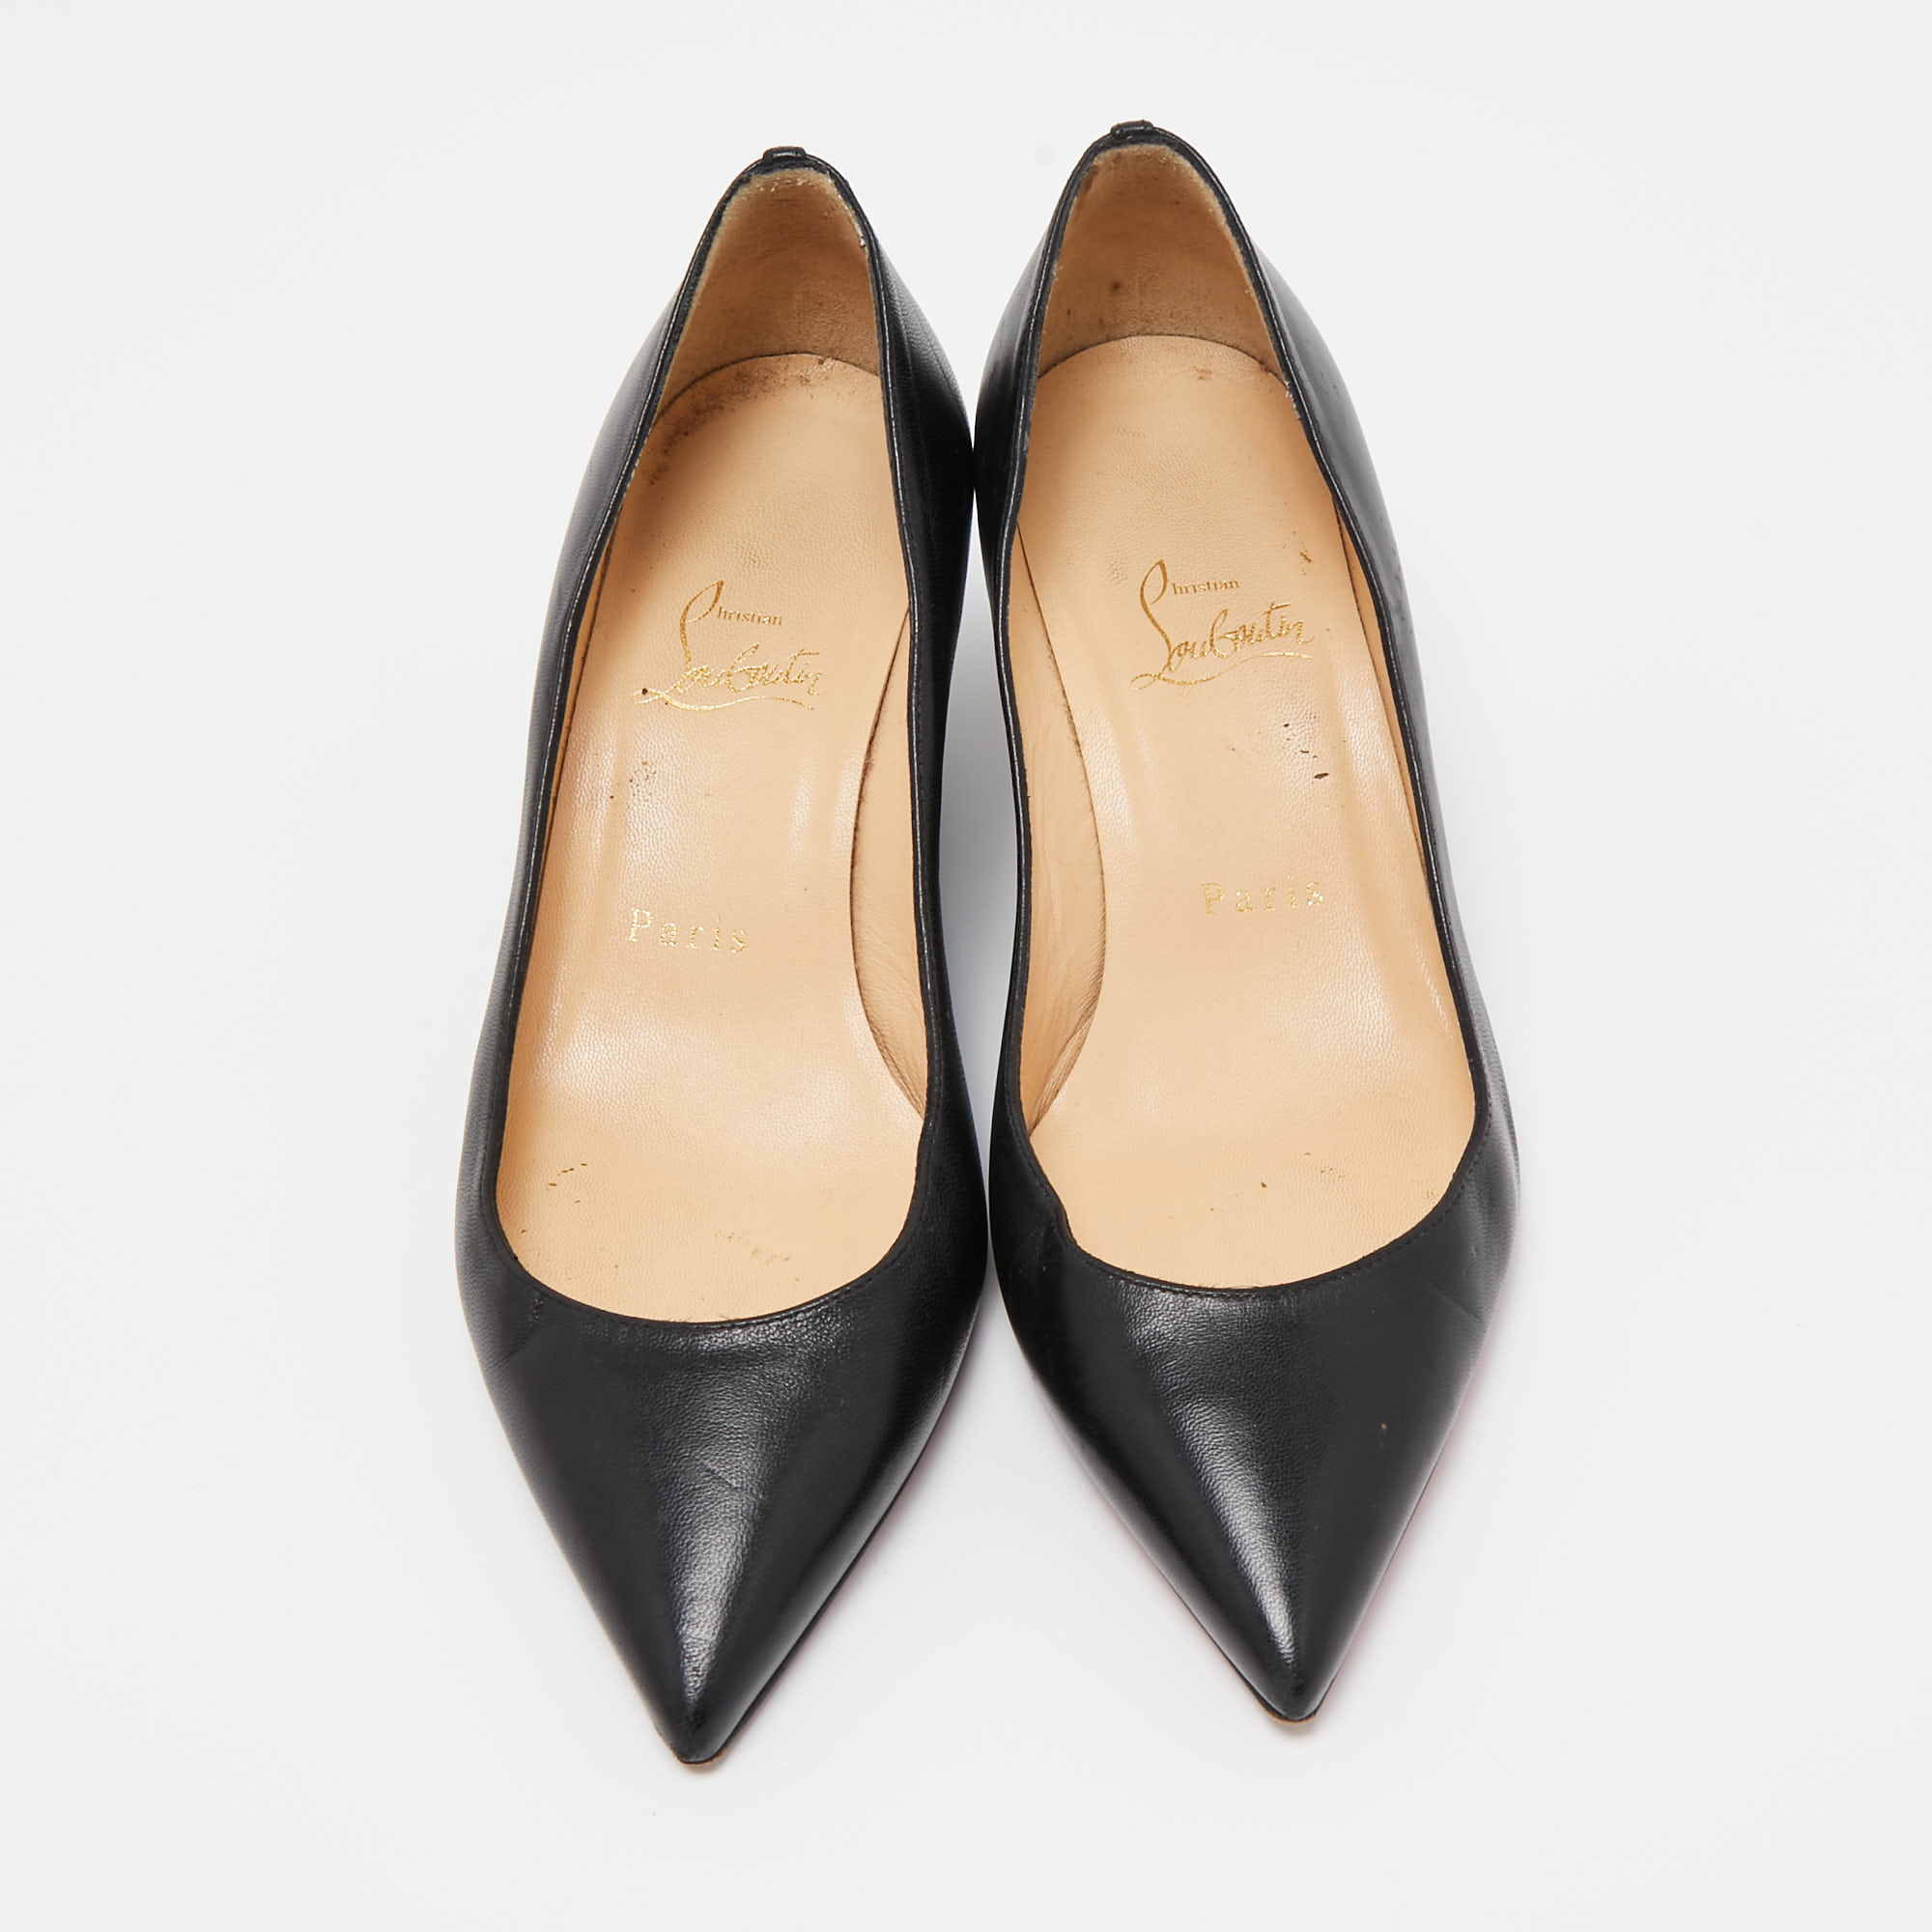 Christian Louboutin Black Leather Pointed Toe Wedge Pumps Size 37.5